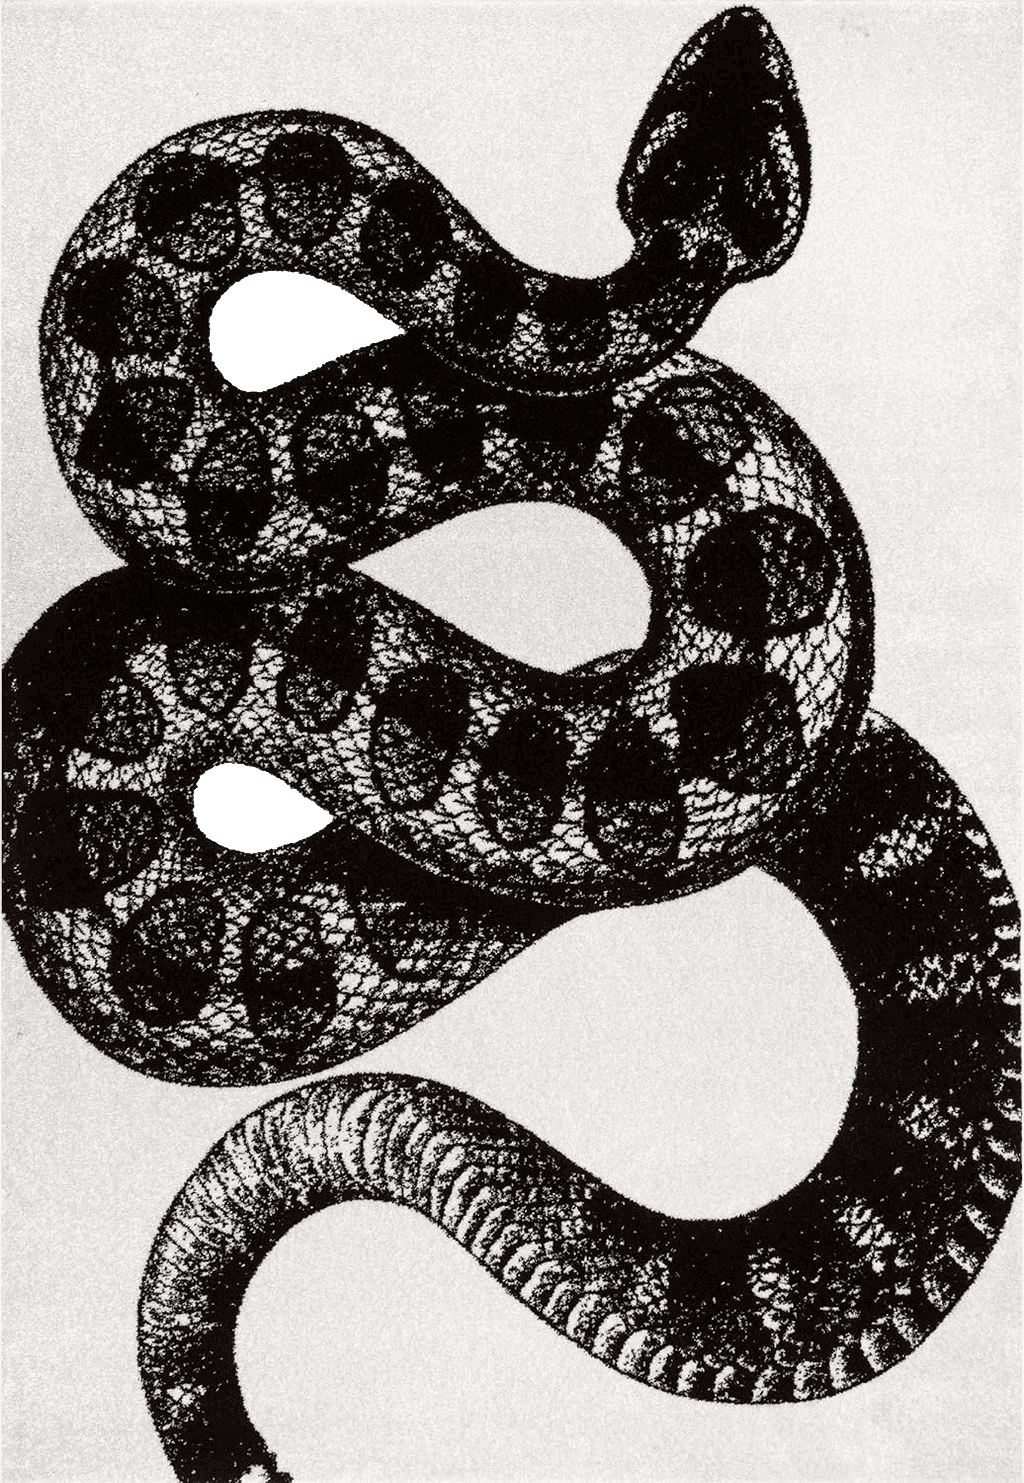 Snake rugs nuLOOM Thomas Paul Serpent Area Rug, 4x6, Black and White